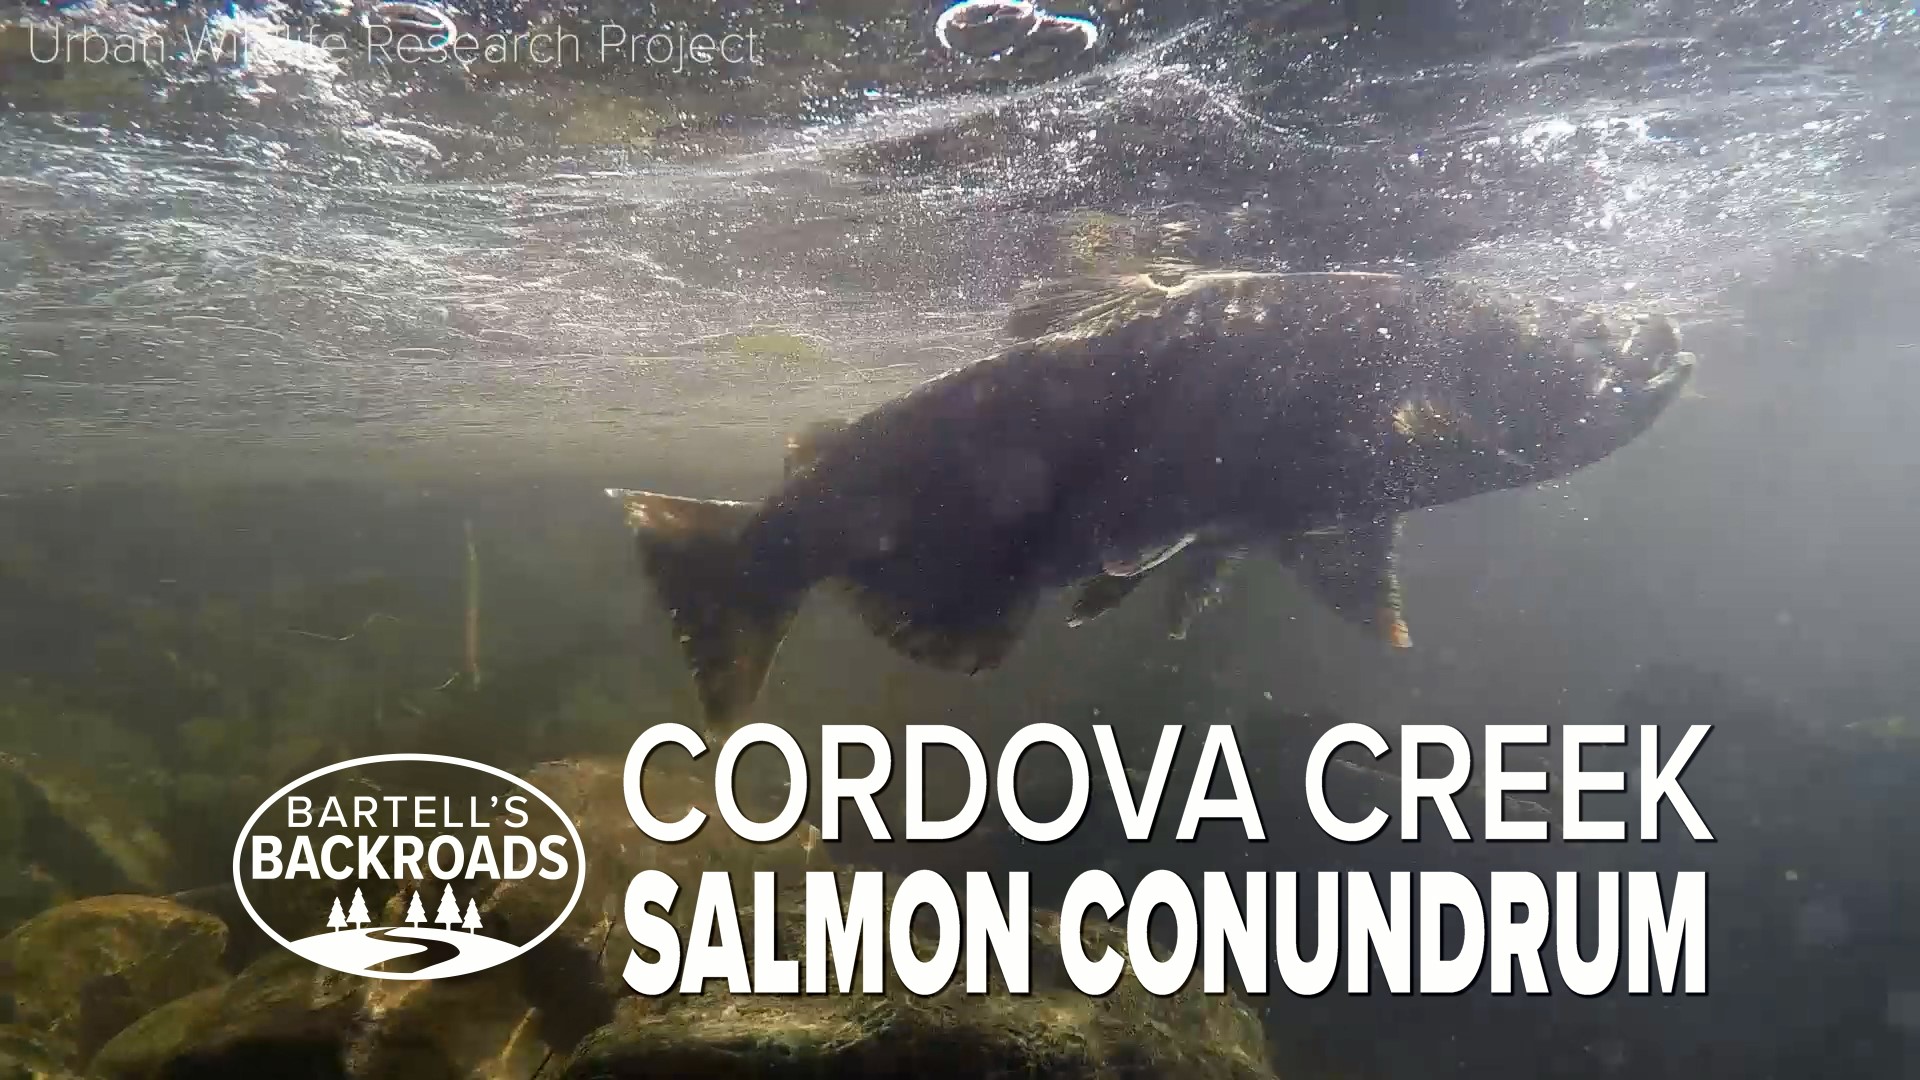 A restoration project has brought wildlife back to Cordova Creek, even salmon looking to spawn.